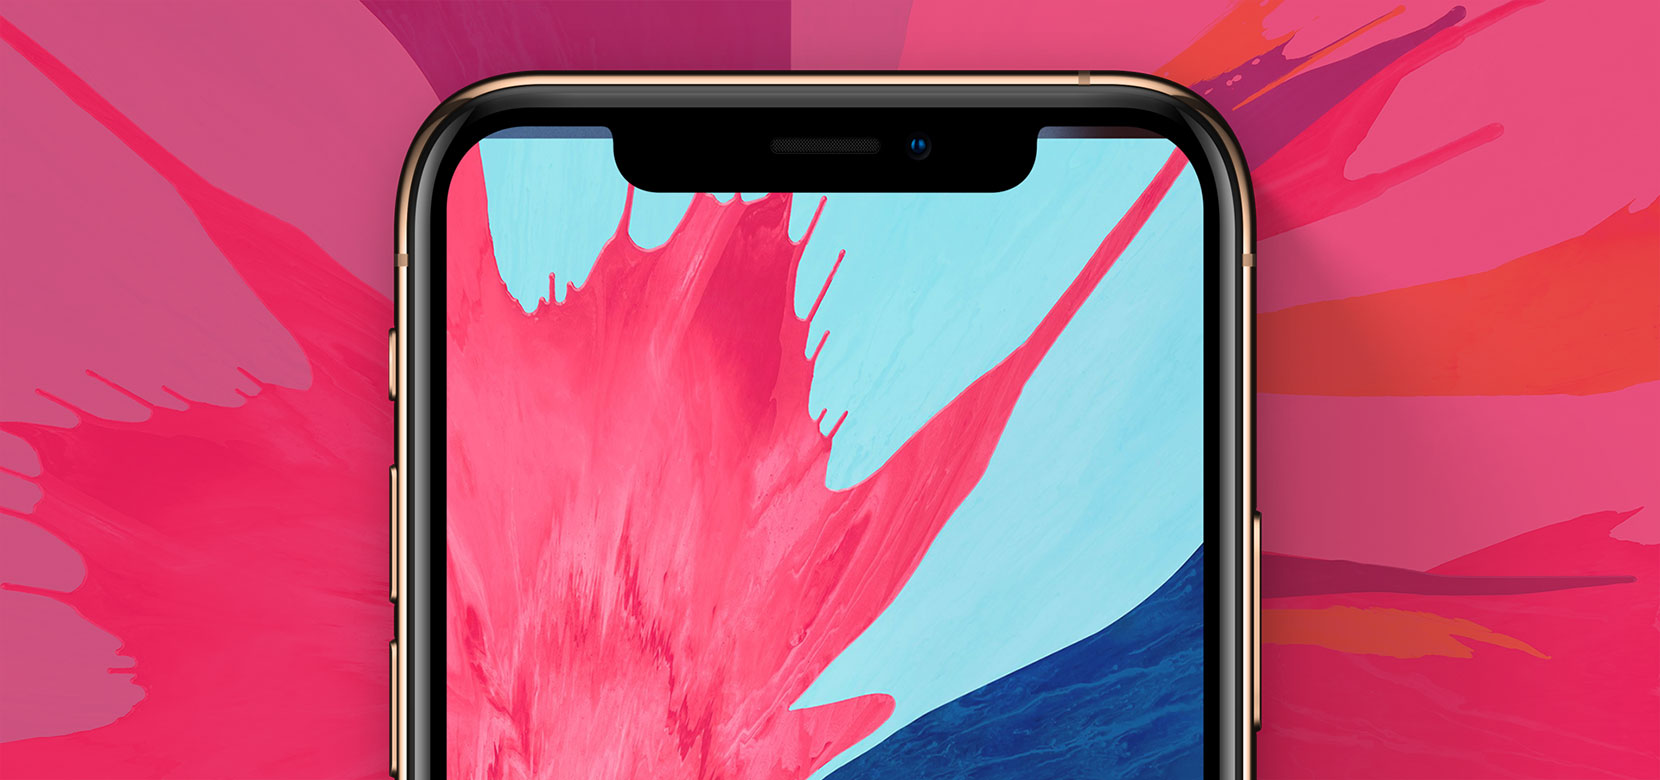 iPhone X Wallpapers HD